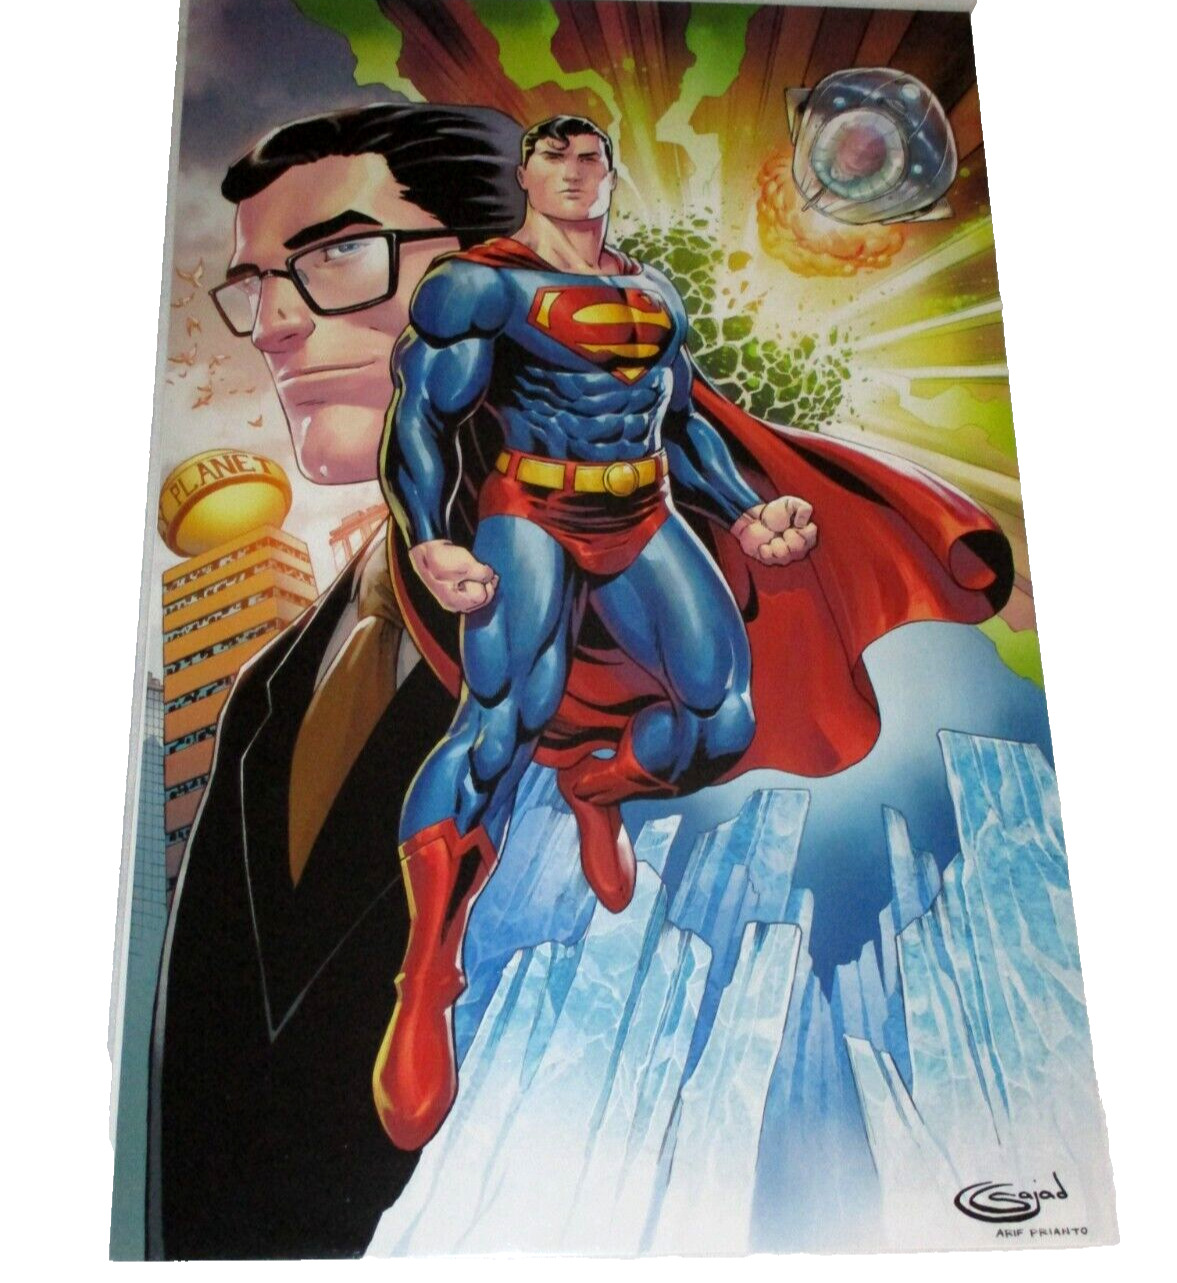 11X17 SUPERMAN DAILY PLANET ARIF PRIANTO ARTWORK BAGGED/BOARDED KENT P2